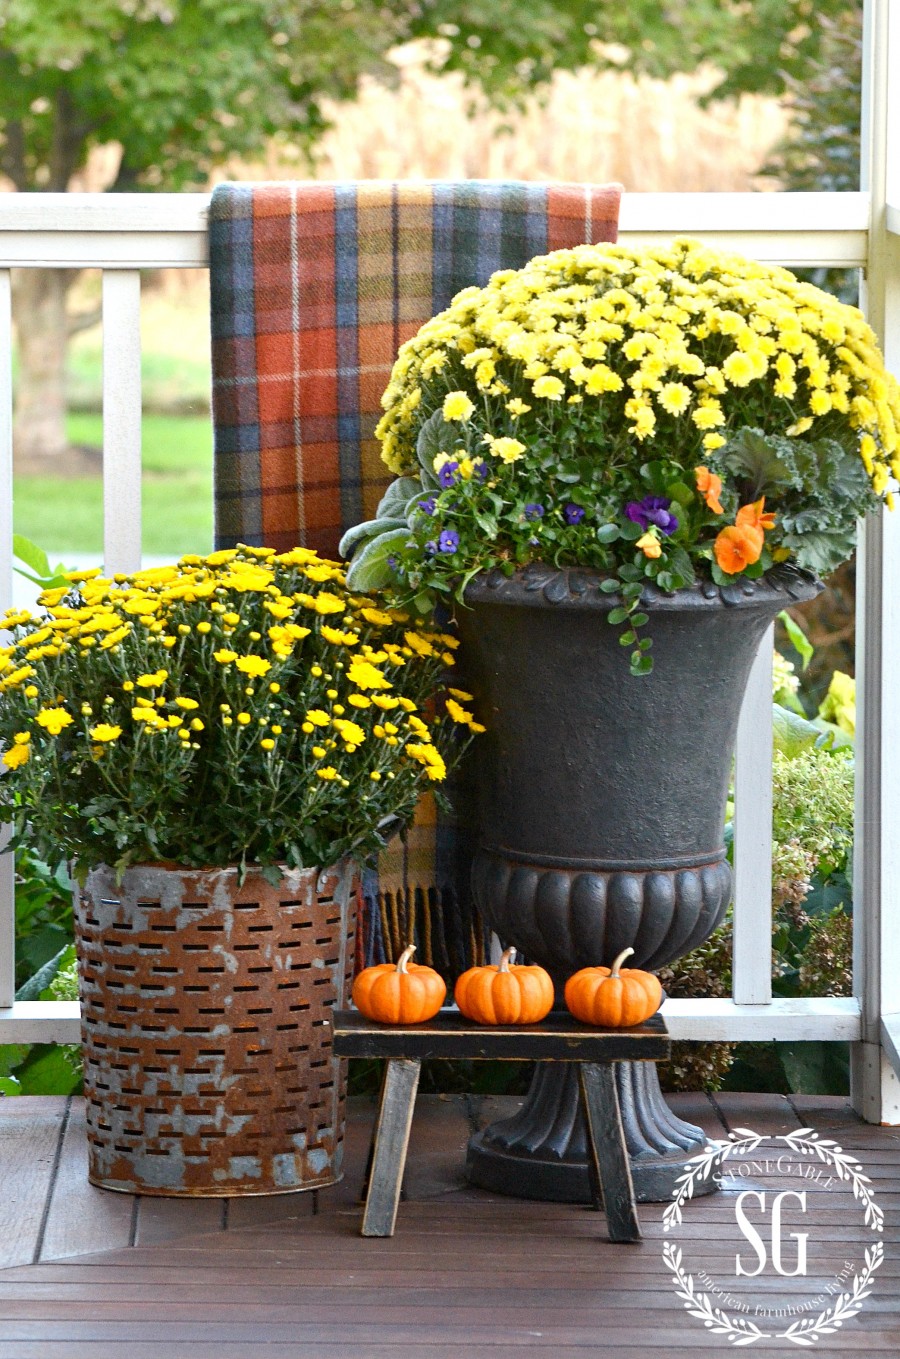 OUTDOOR DECORATING IN SMALL SPACES-Easy to do ideas for decorating small outdoors spaces.